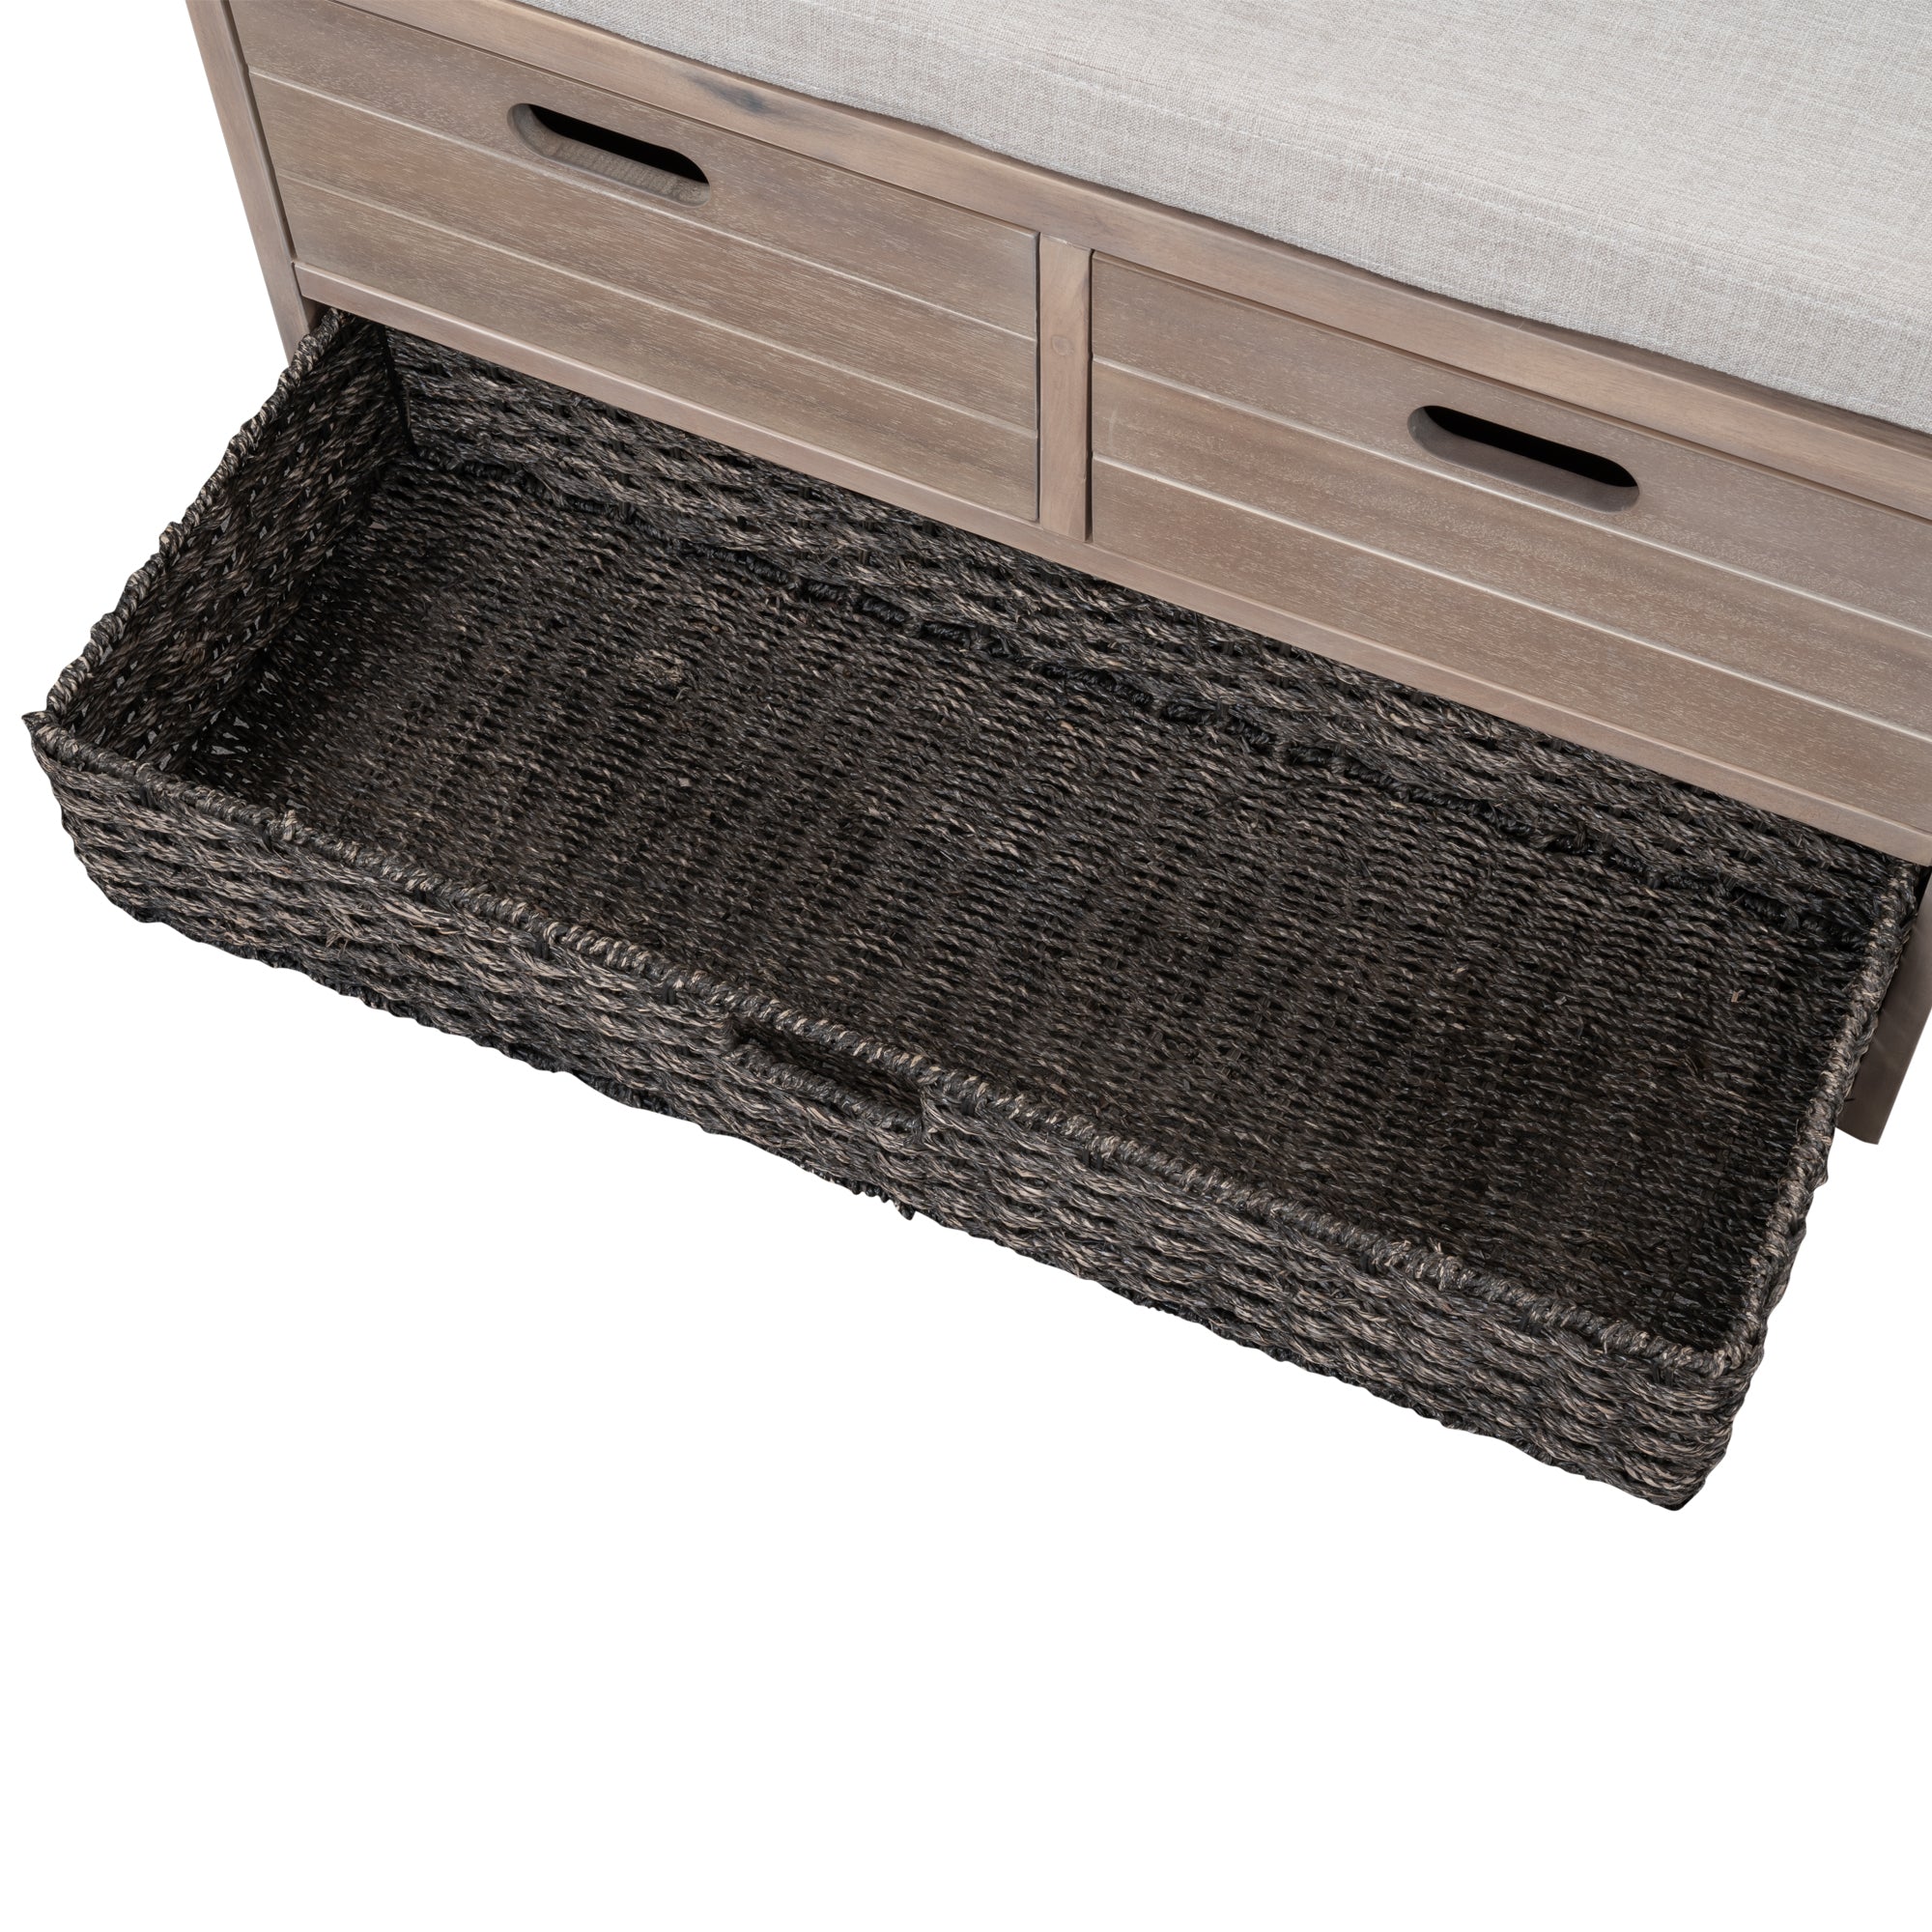 Storage Bench with Removable Basket